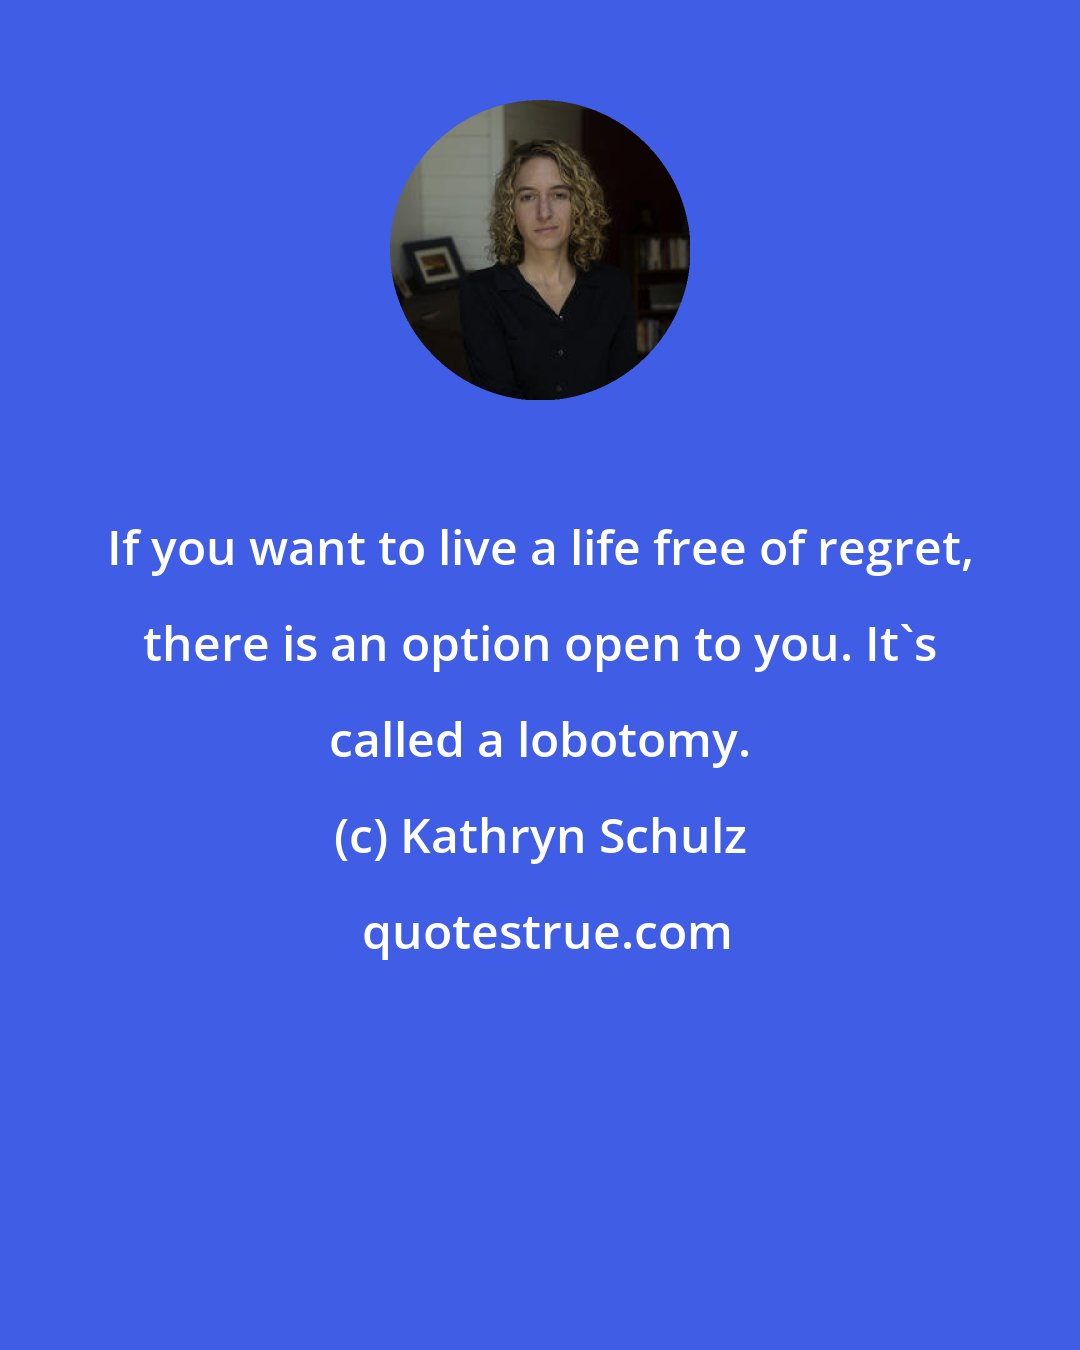 Kathryn Schulz: If you want to live a life free of regret, there is an option open to you. It's called a lobotomy.